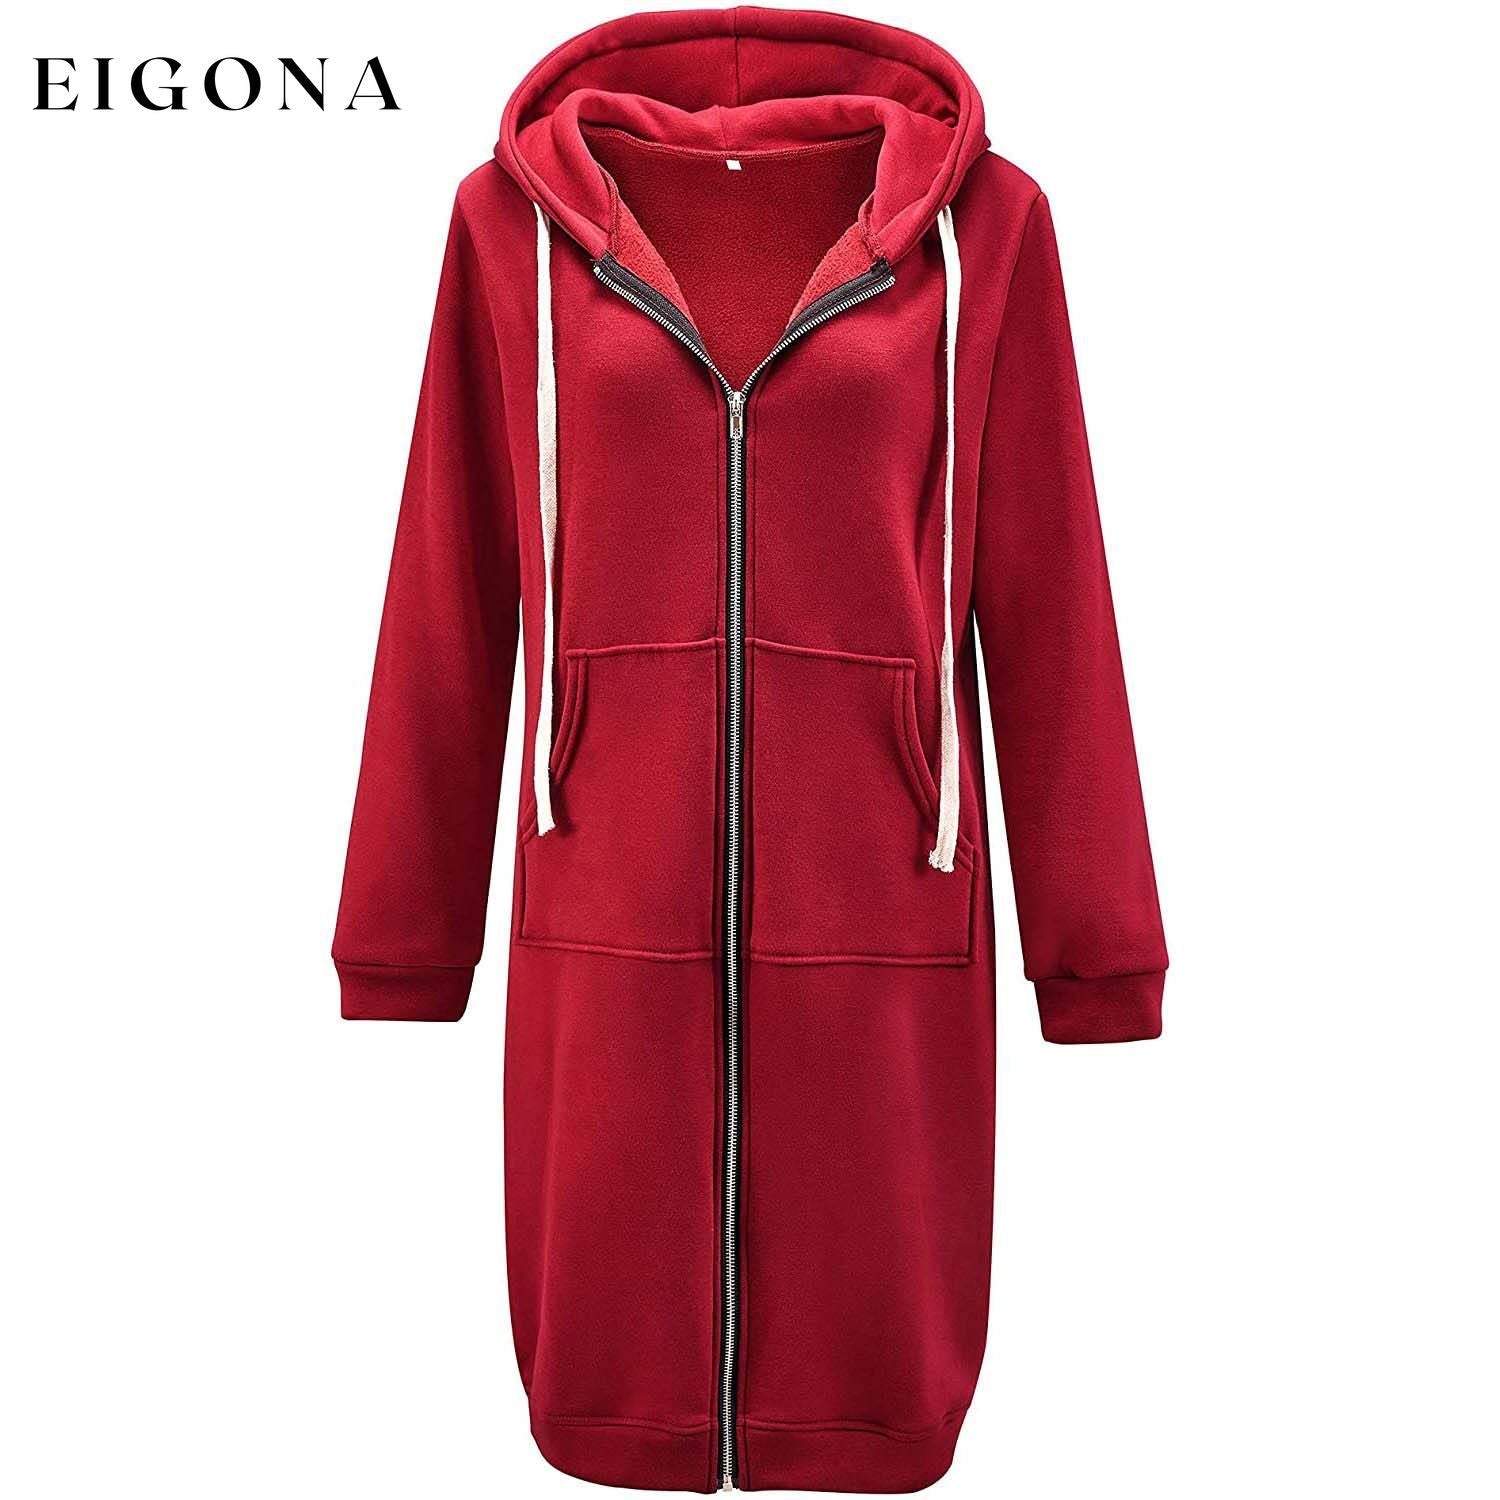 Women's Casual Zip up Hoodies Long Tunic Sweatshirts Jackets Fashion Plus Size Hoodie with Pockets Red __stock:100 Jackets & Coats refund_fee:1200